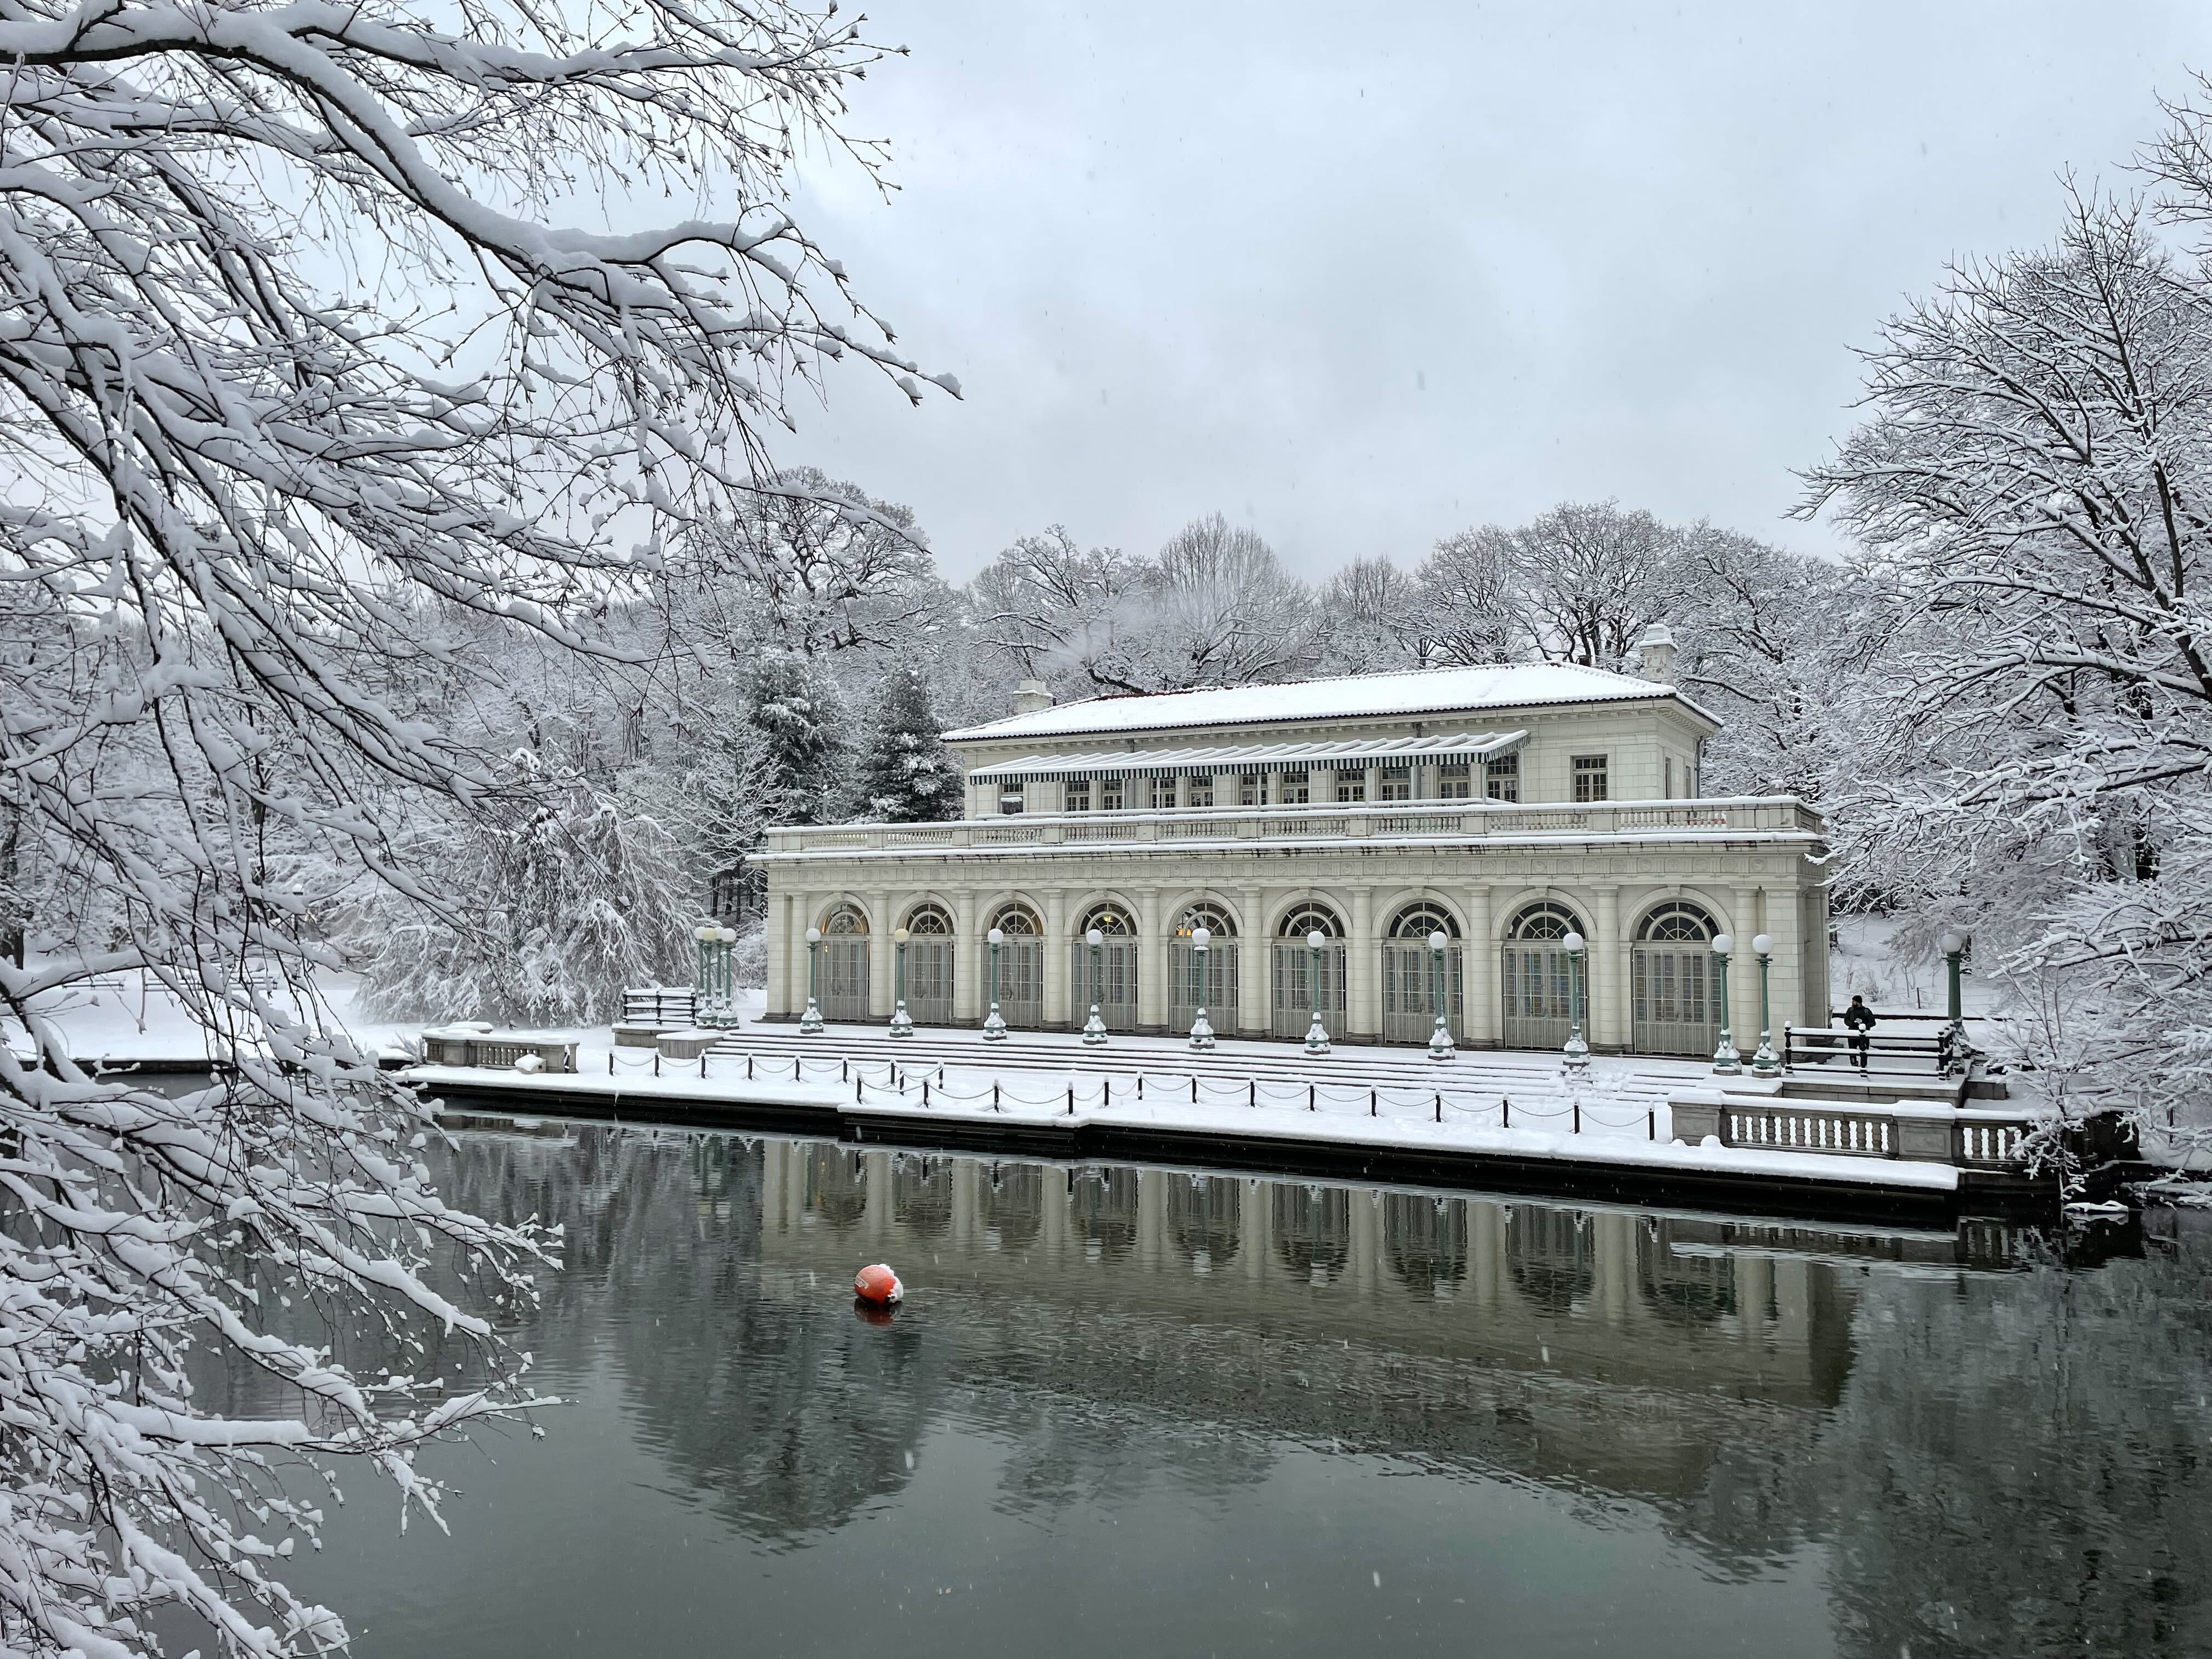 The Prospect Park Boathouse covered in snow.